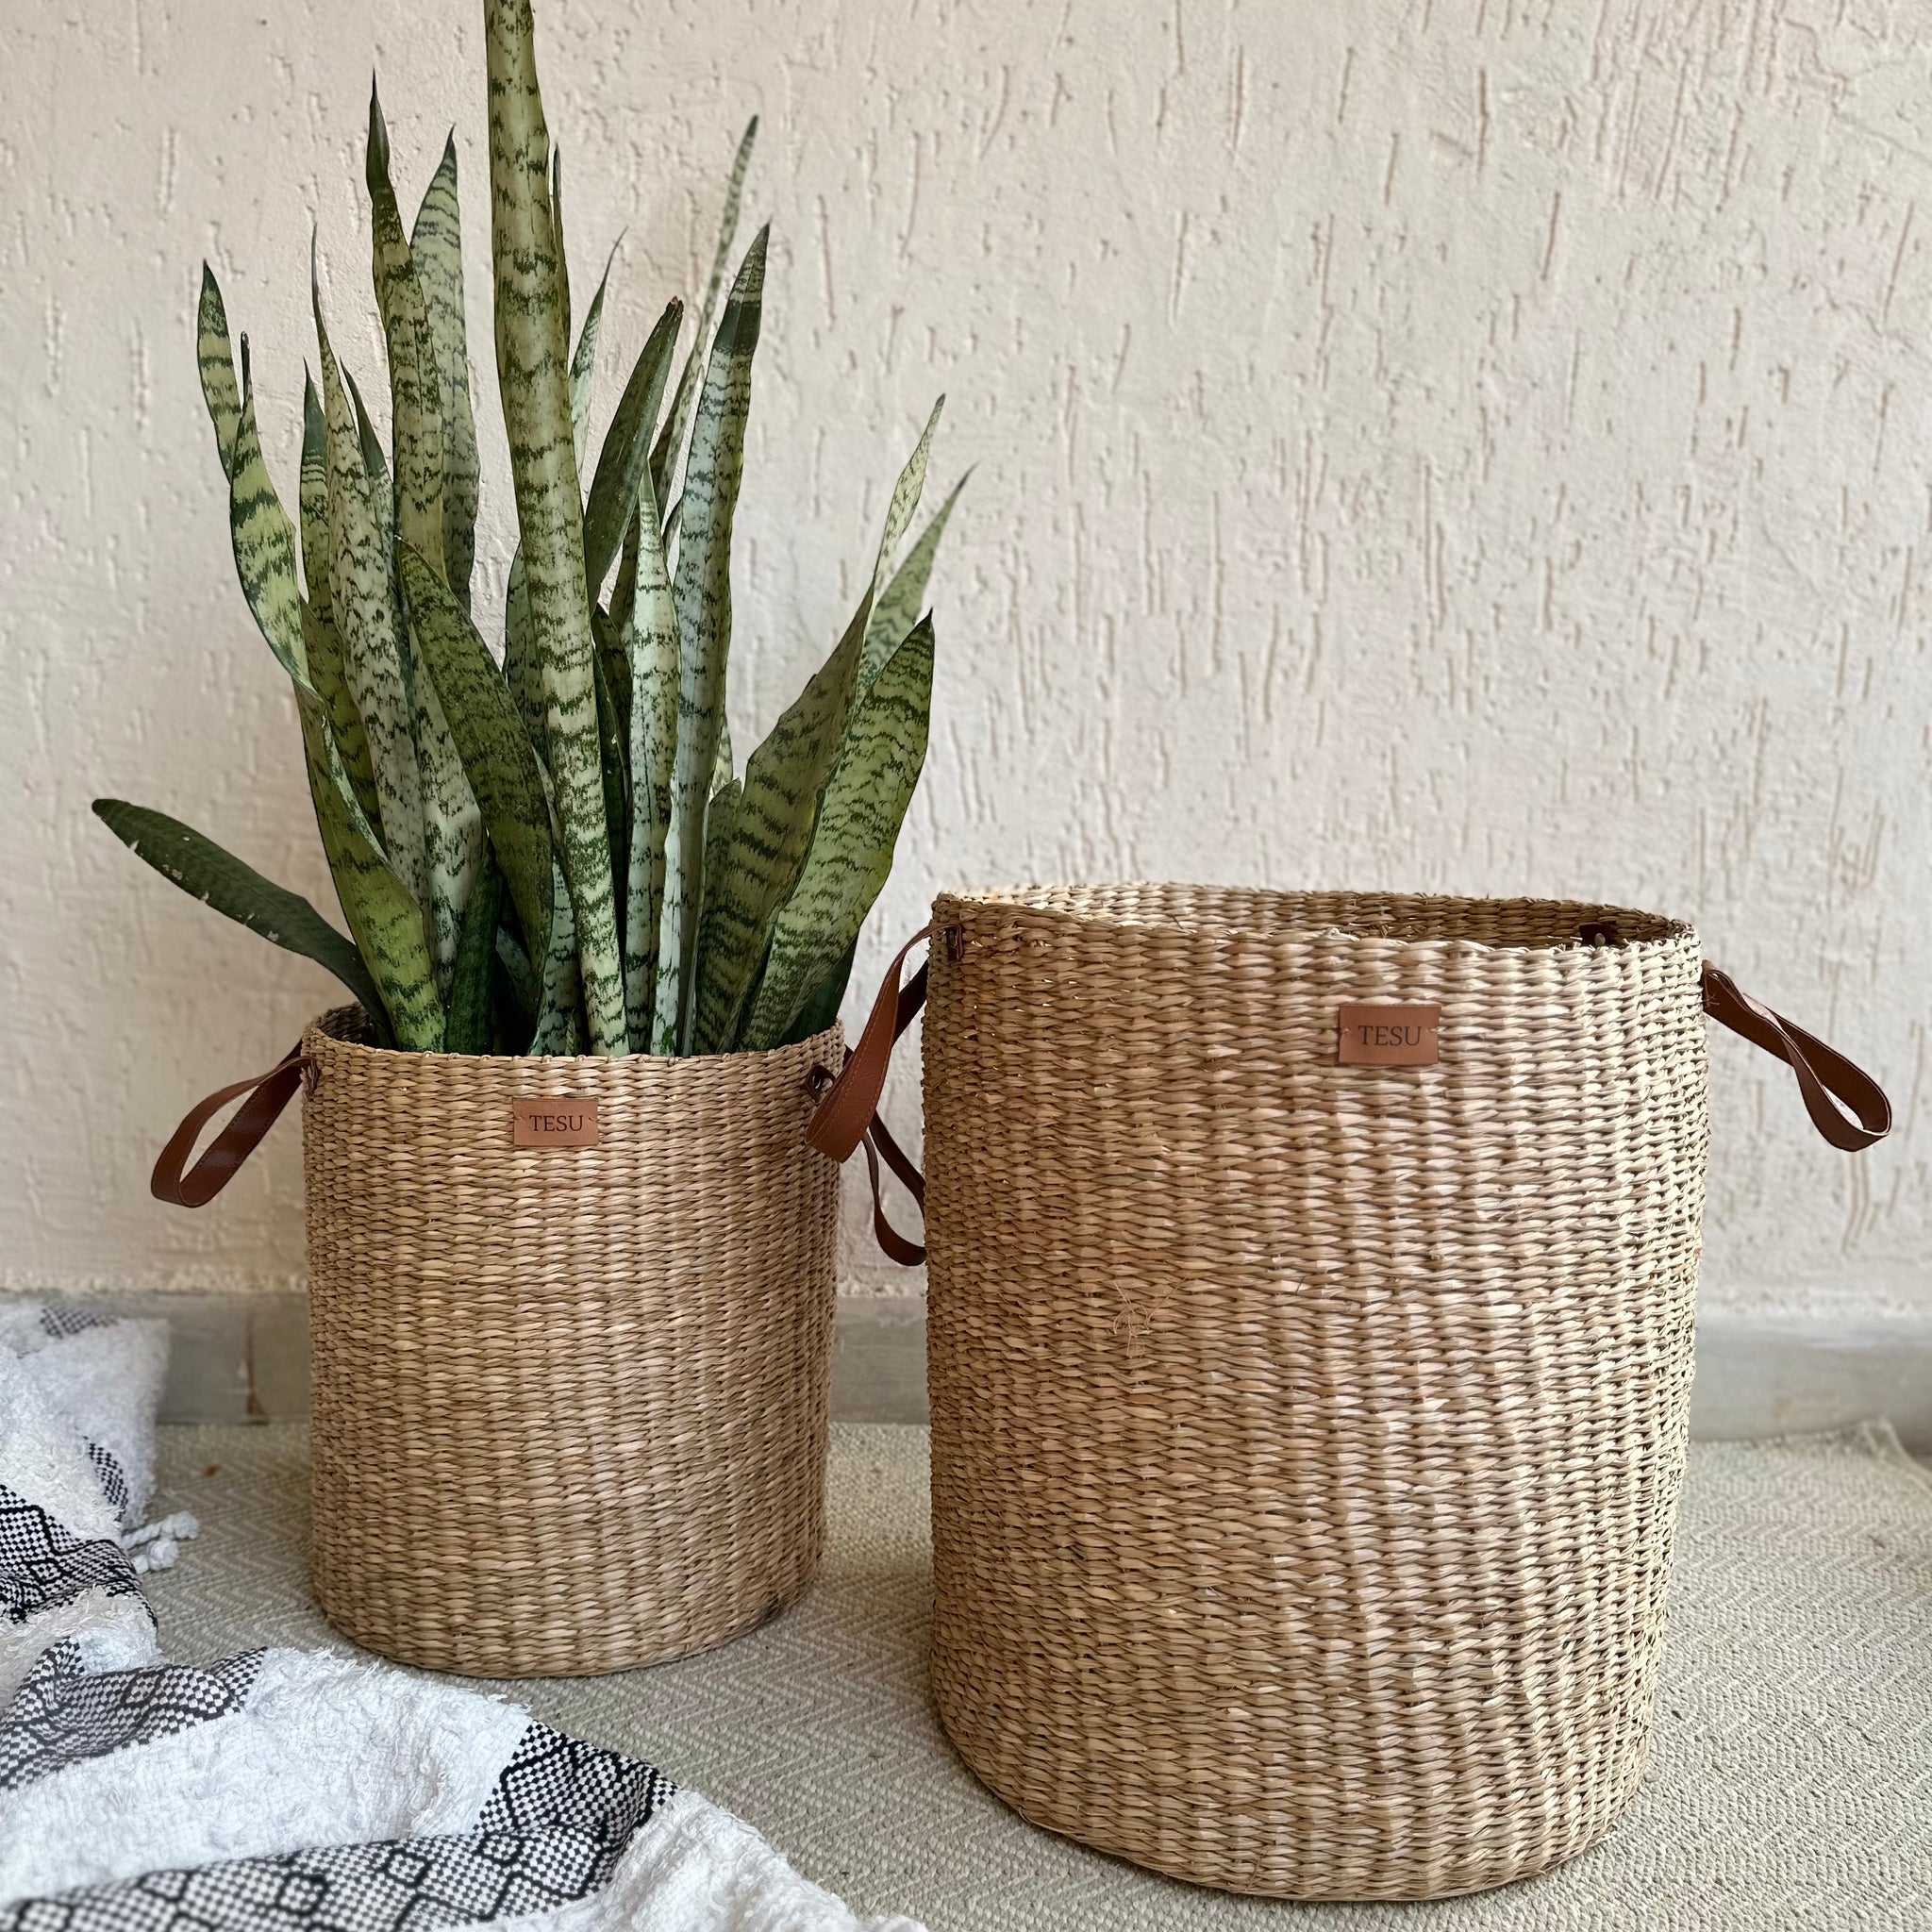 Enhance your Dream Home with our curated selection of premium Home Décor items. Super versatile and super-chic, these natural, handmade sea grass planters are great planters for your houseplants and bring a classic and organic feel to your space. Beautiful and lightweight, seagrass planters is durable, giving you a sustainable and eco-friendly product.tesu